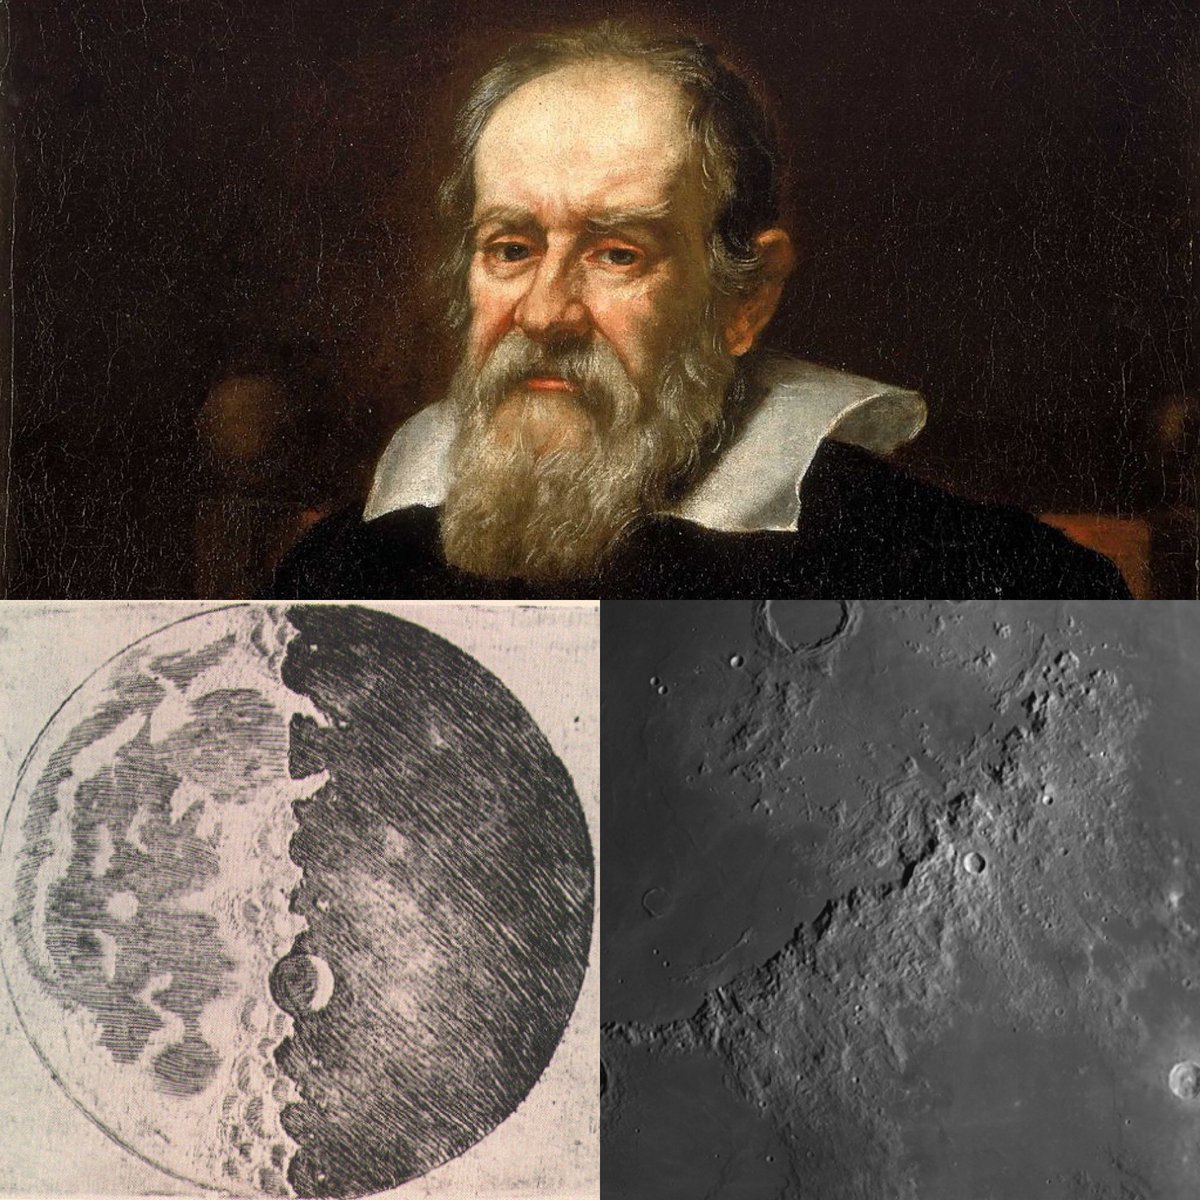 14/ We know so much more about it now than Galileo did, but this was precisely the insight Galileo had when his telescope revealed mountains on the Moon. He realized it is “another Earth”, & since the Moon is a planet, so all the planets are complex geological bodies like Earth.